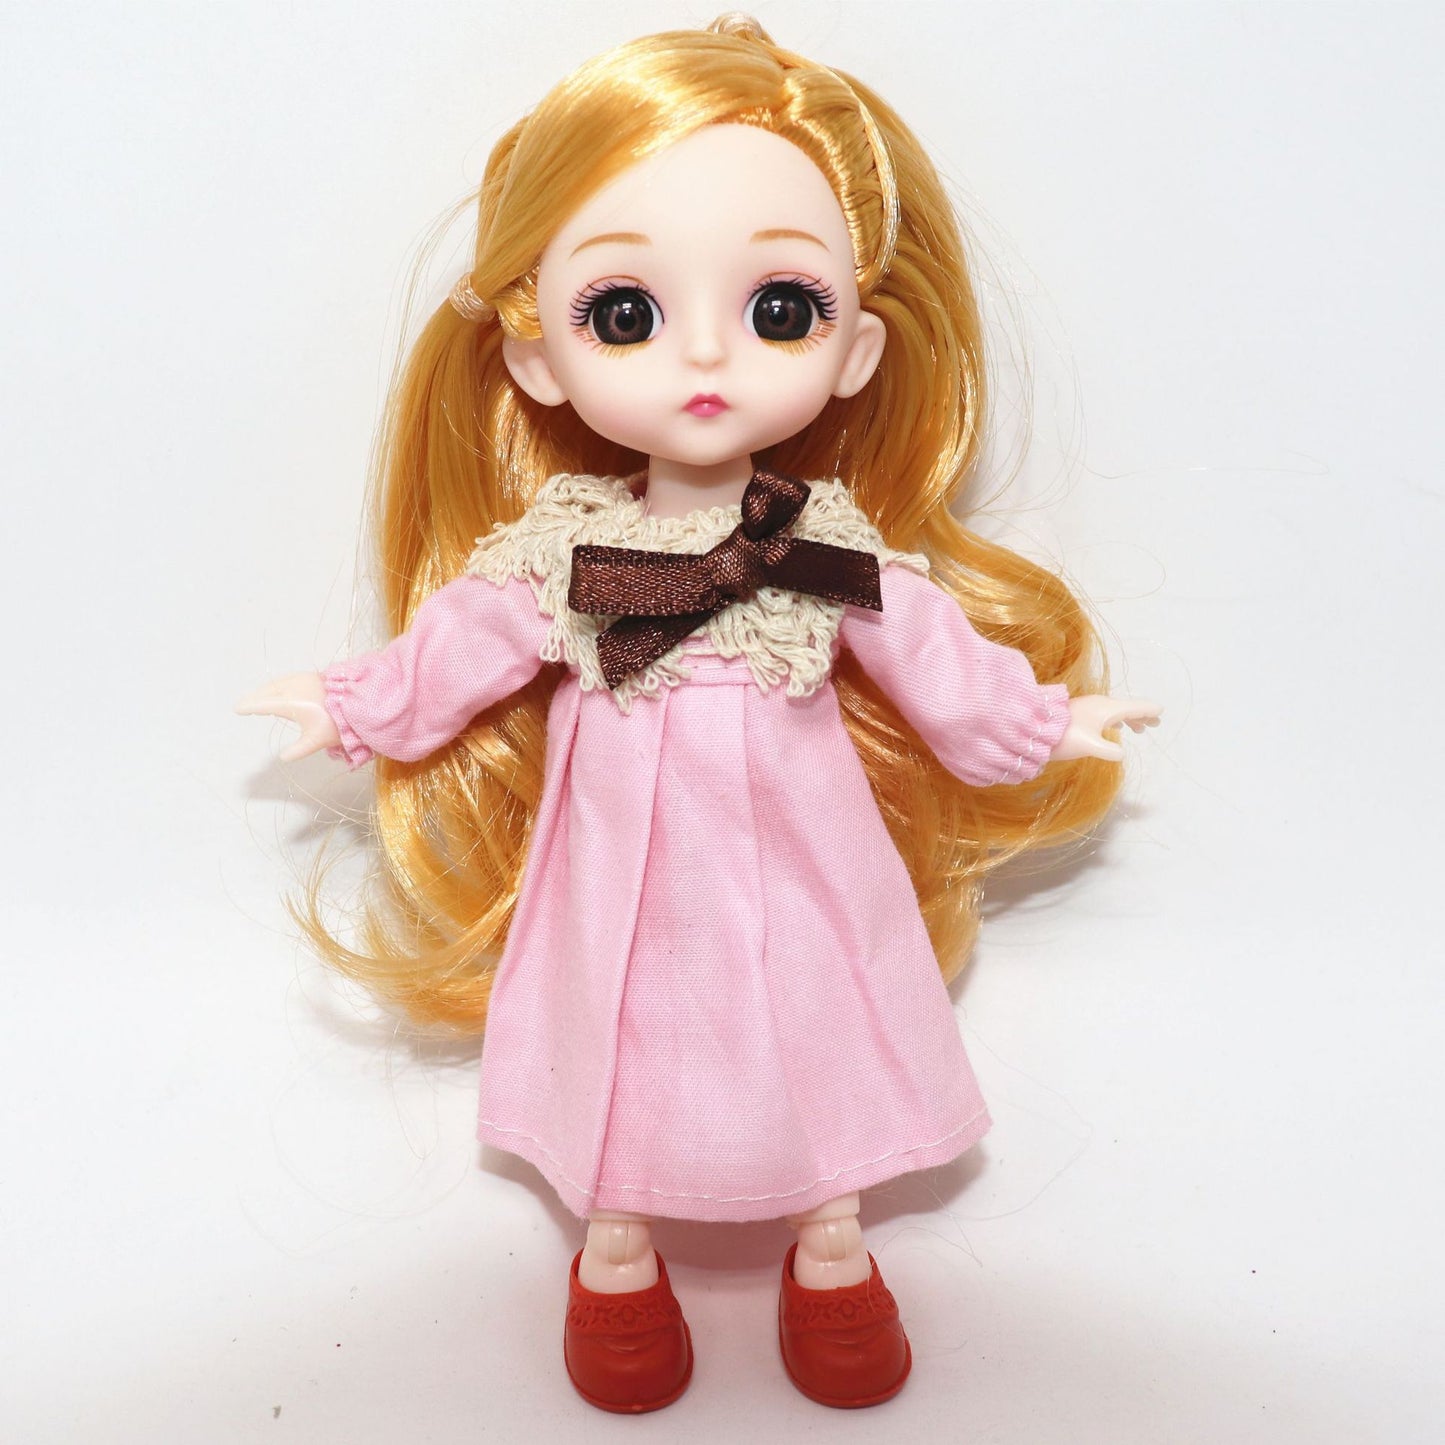 Bjd 16cm Movable Joint Doll with Real 3D Eyes and High-end Fashion Dress - DIY Girl Toy Best Gift - Toyland EU